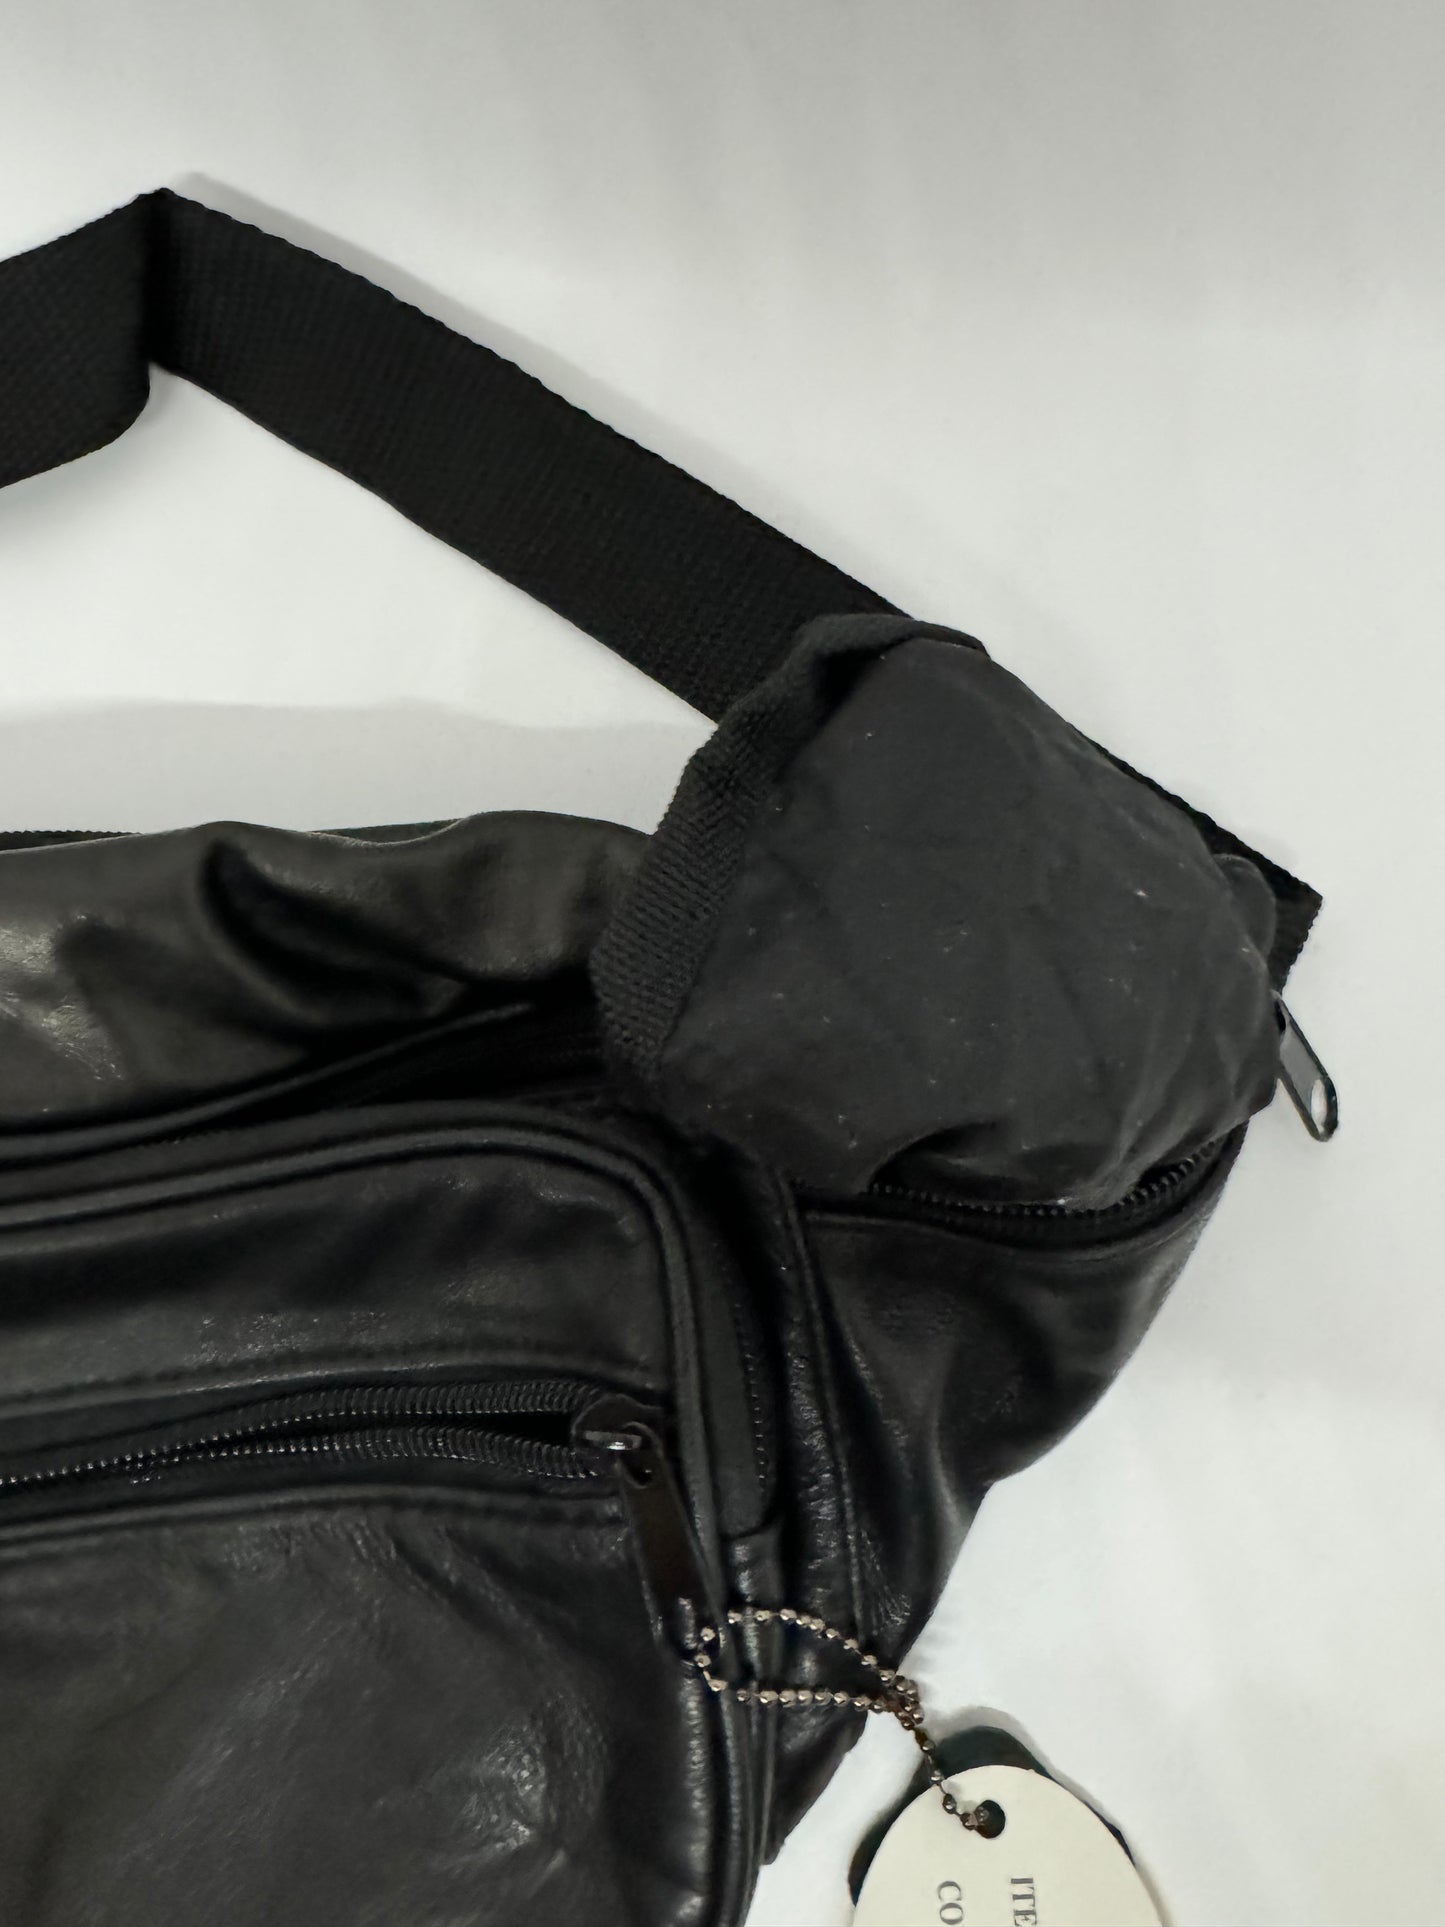 The picture shows a black bag, possibly made of leather or a similar material. The bag has a zipper on the top and a smaller zipper on the side. There is a black strap attached to the bag, which is made of a woven material. The strap is thick and seems sturdy. There is also a tag attached to the bag with a ball chain, but the text on the tag is not visible in the picture. The background is plain white.